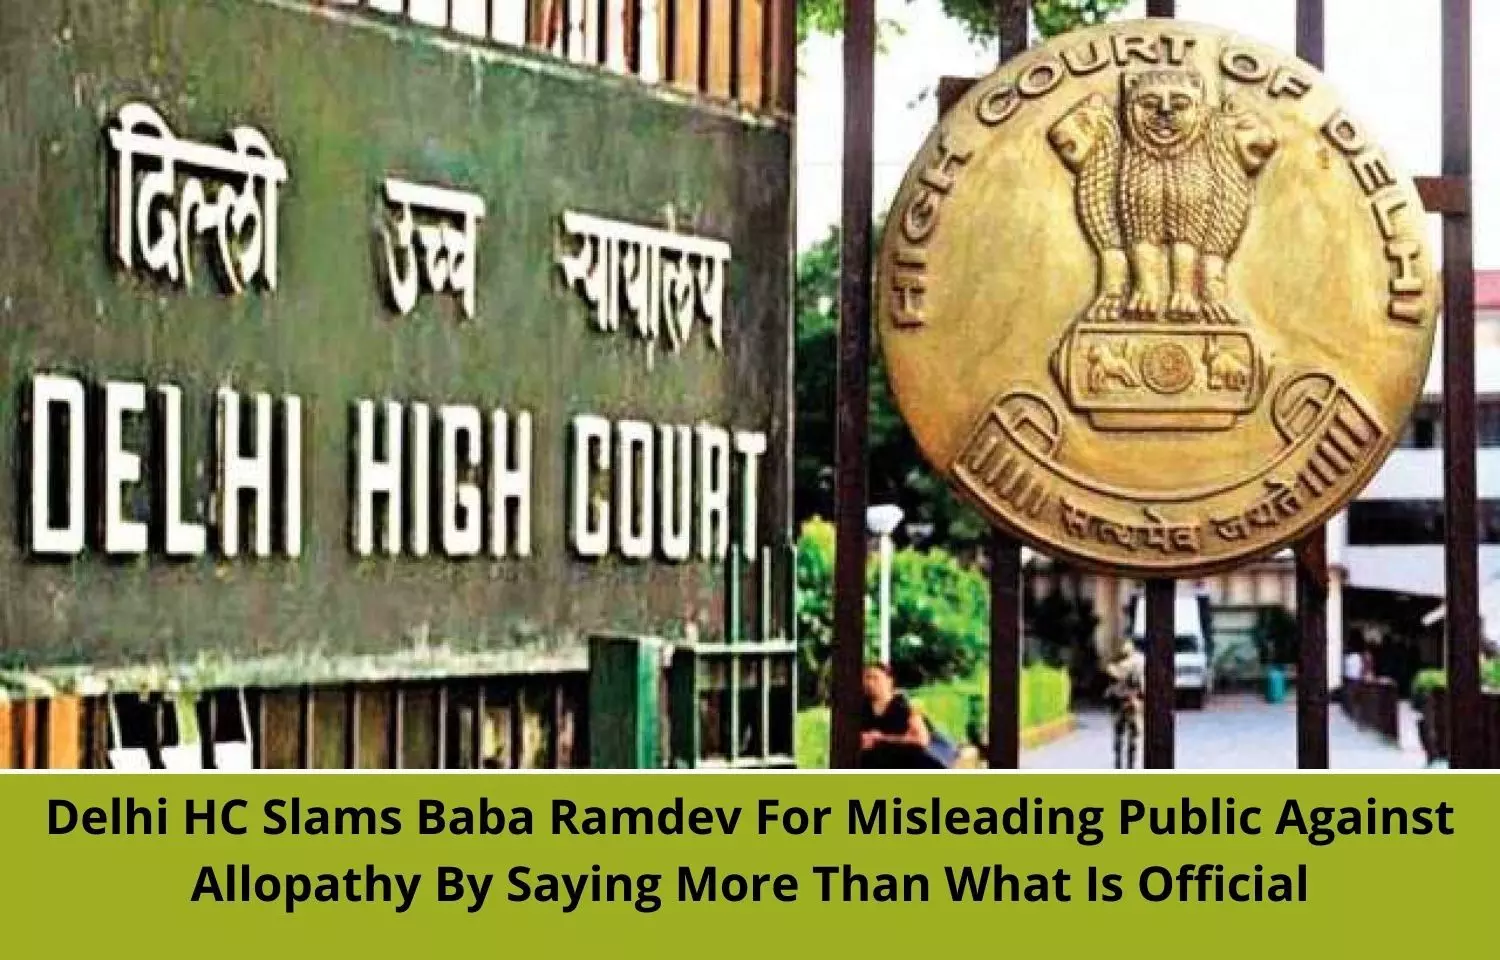 Delhi HC slams Baba Ramdev for misleading public against allopathy by saying more than what is official